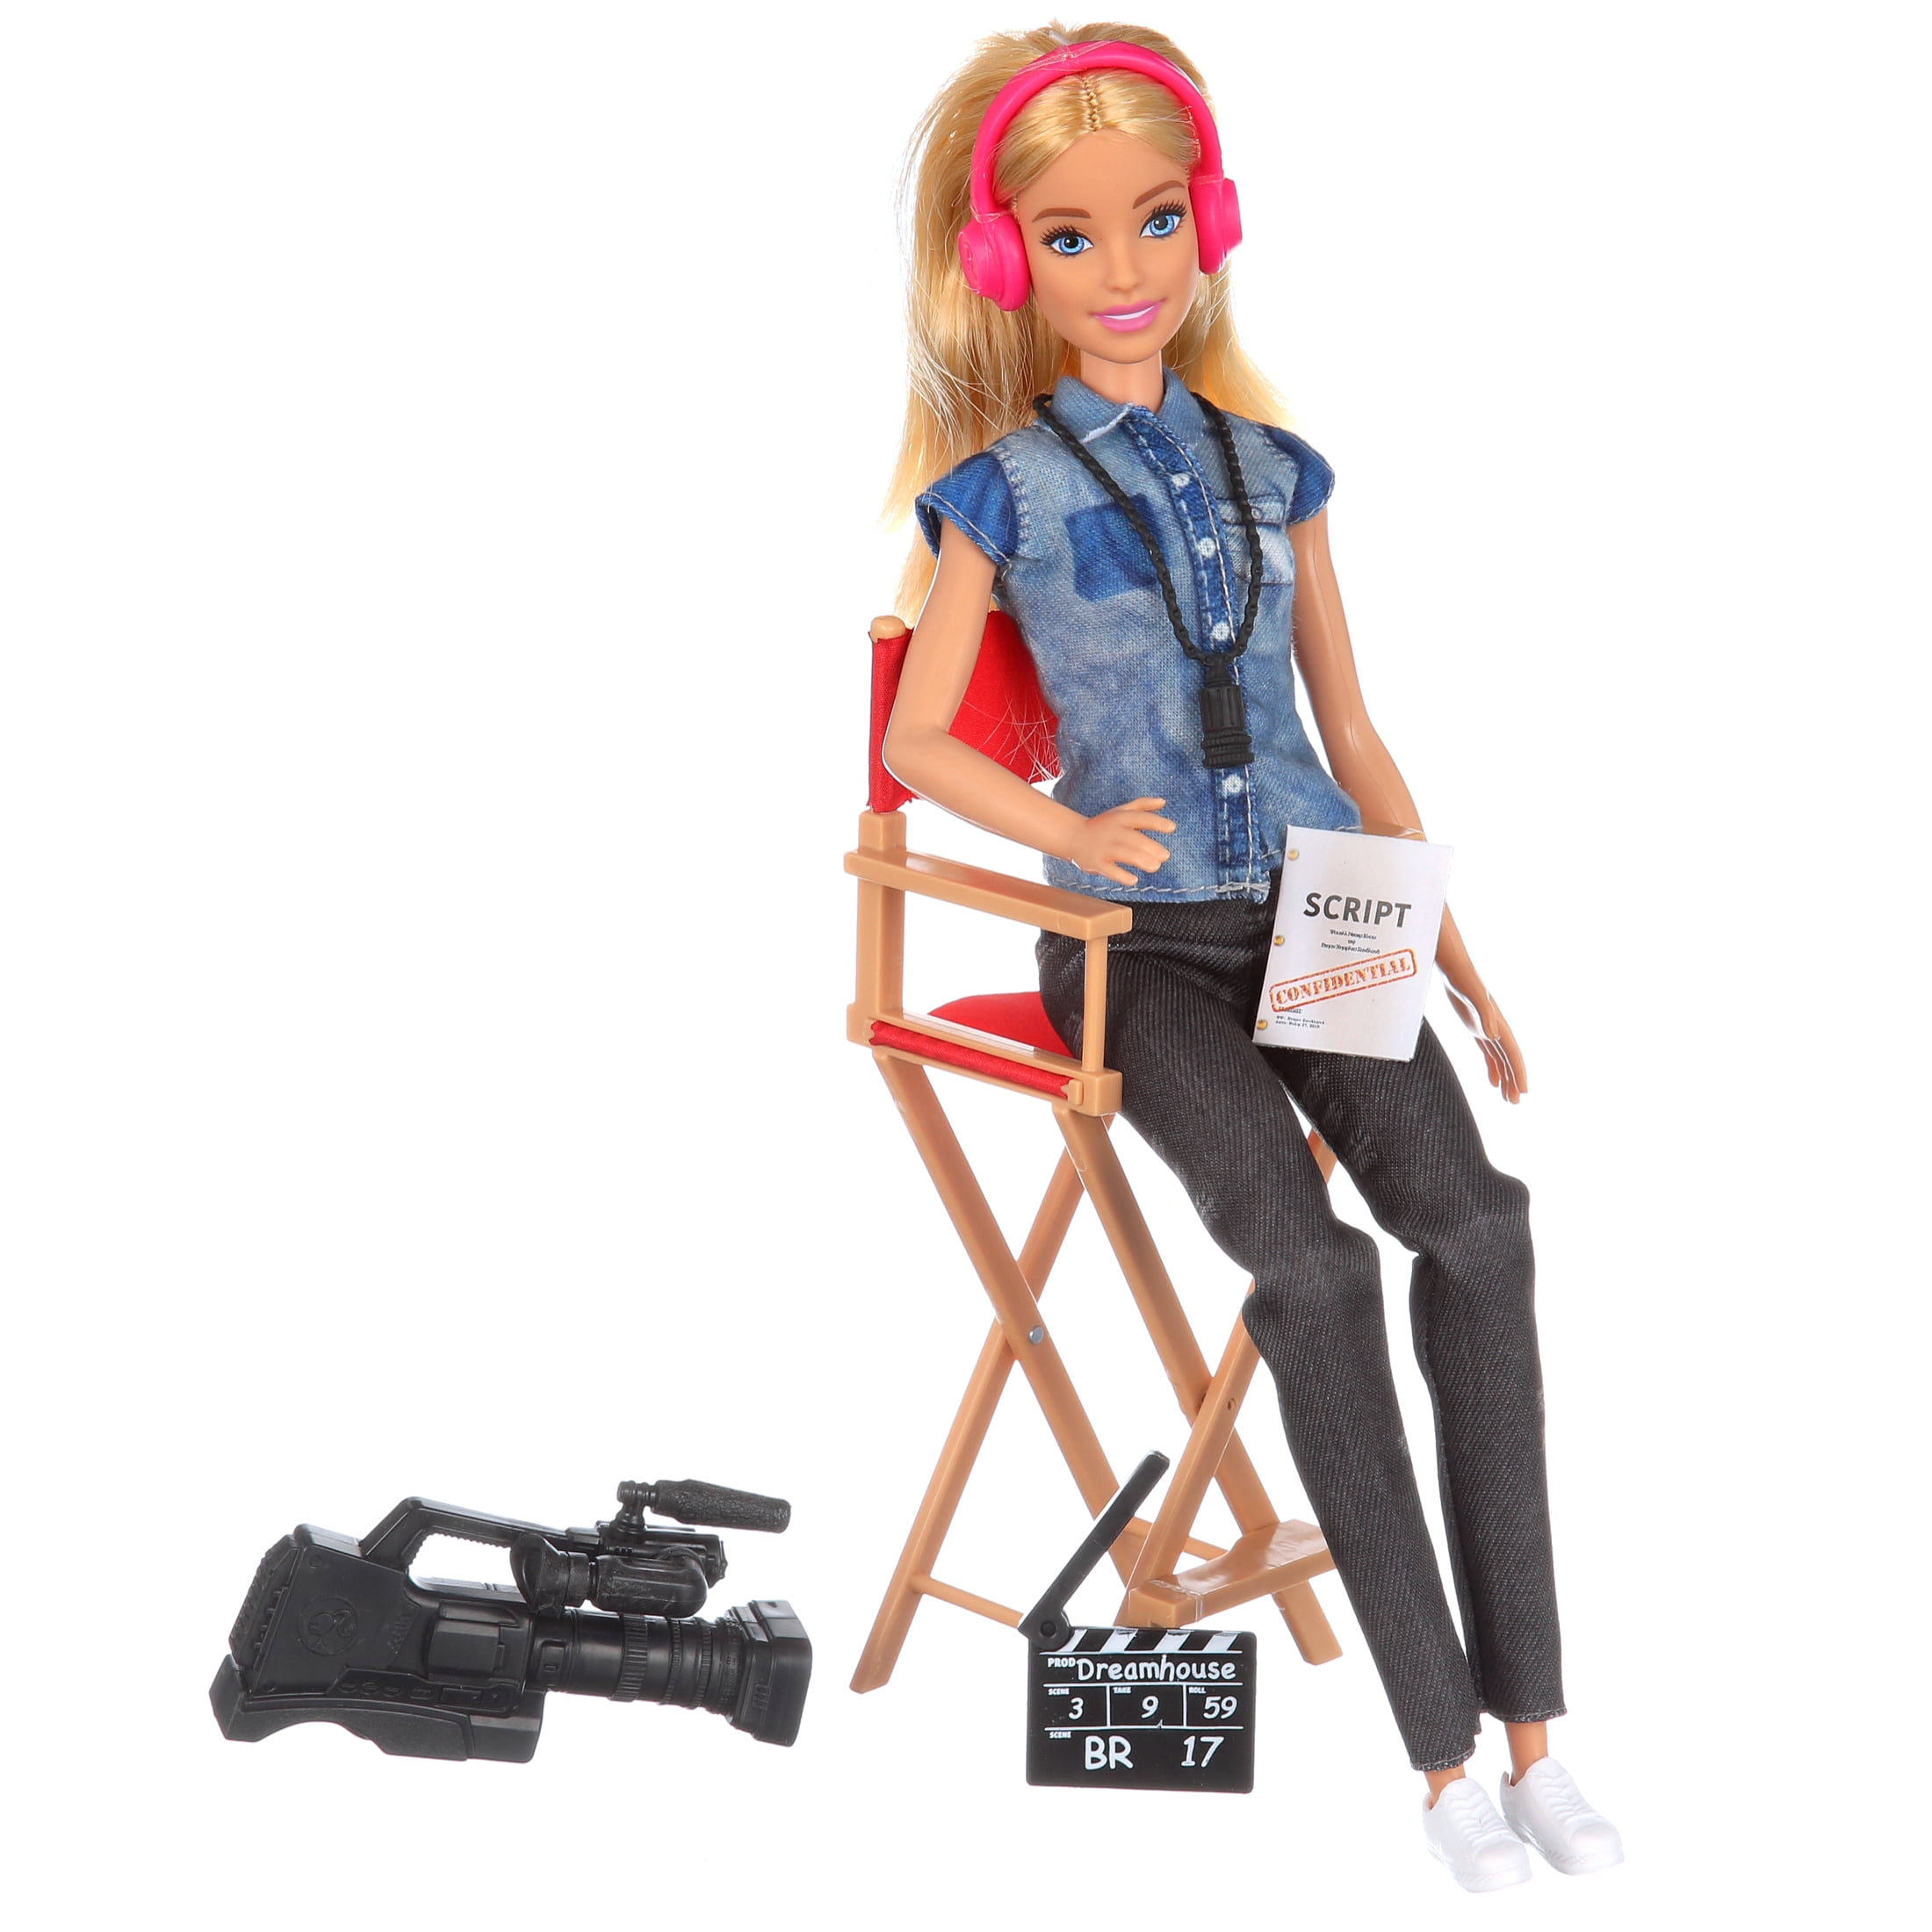 Barbie Film Director Playset with Doll, Chair, Camera and Accessories